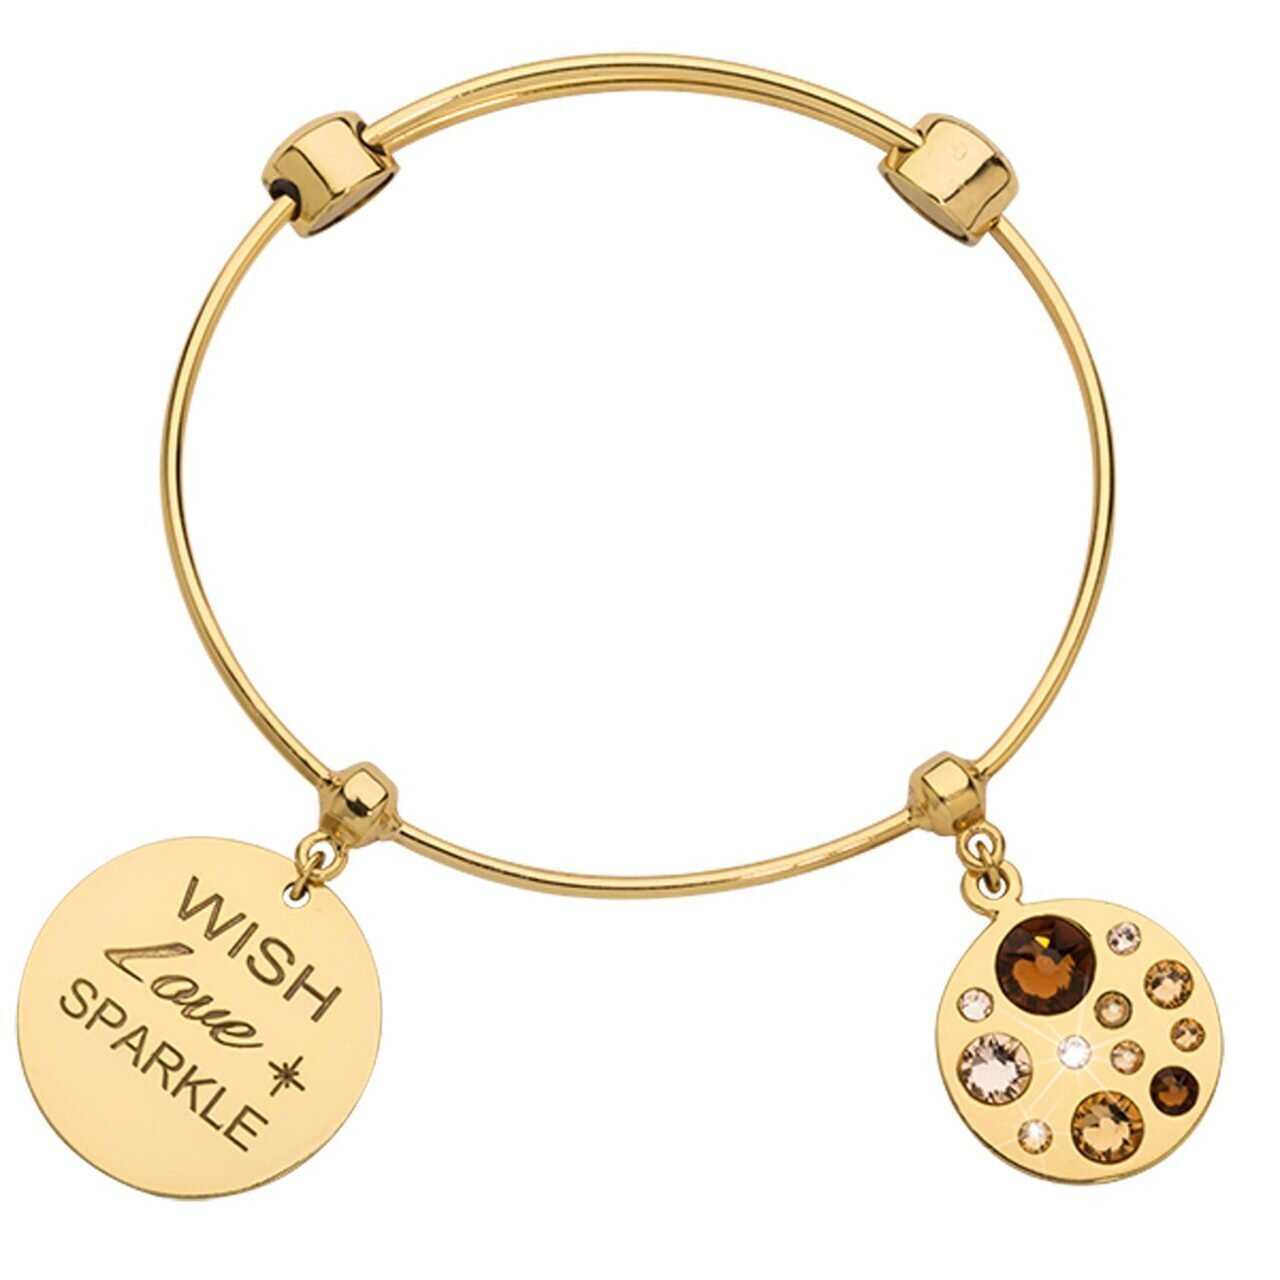 Nikki Lissoni Charm Bangle with Two Fixed Charms Wish Love Sparkle Sparkling Beauty In Bronze Gold Clear Gold-plated 17cm B1143G17